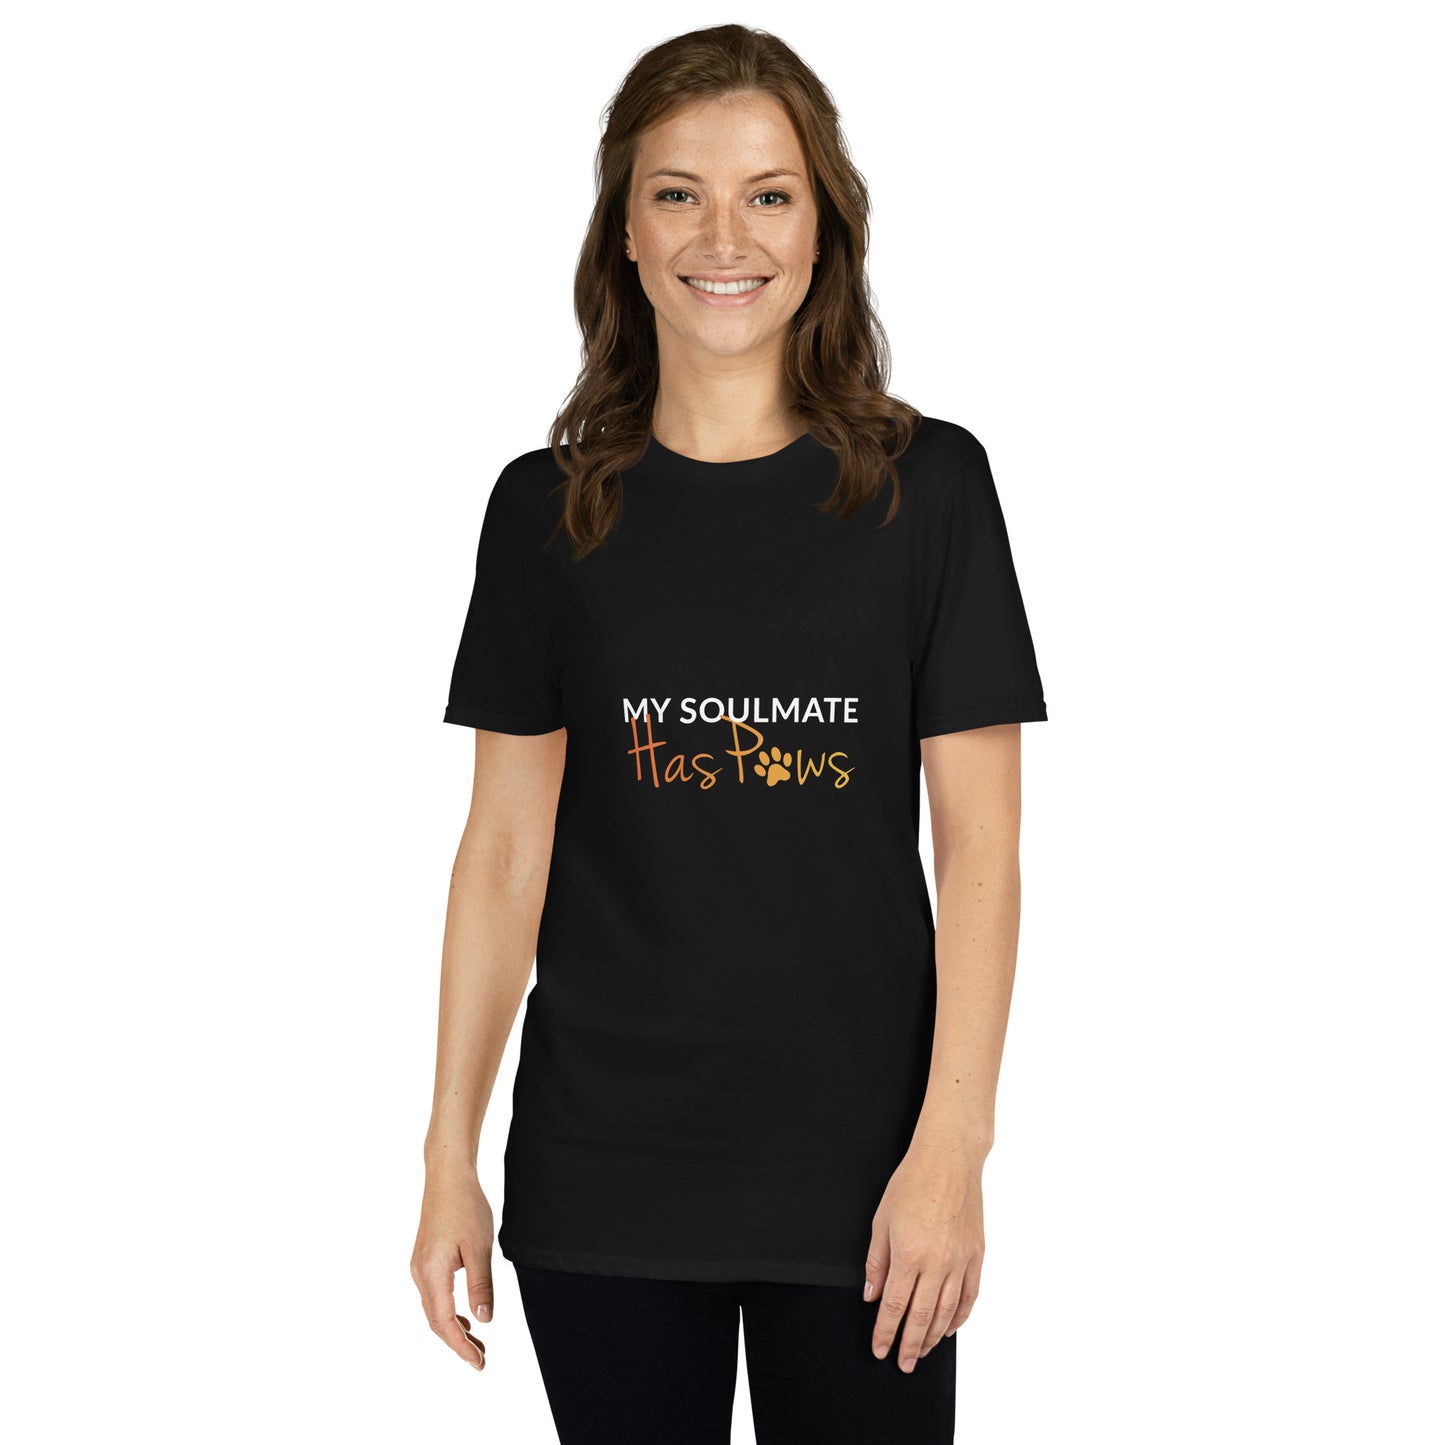 My Soulmate Has Paws Unisex T-Shirt